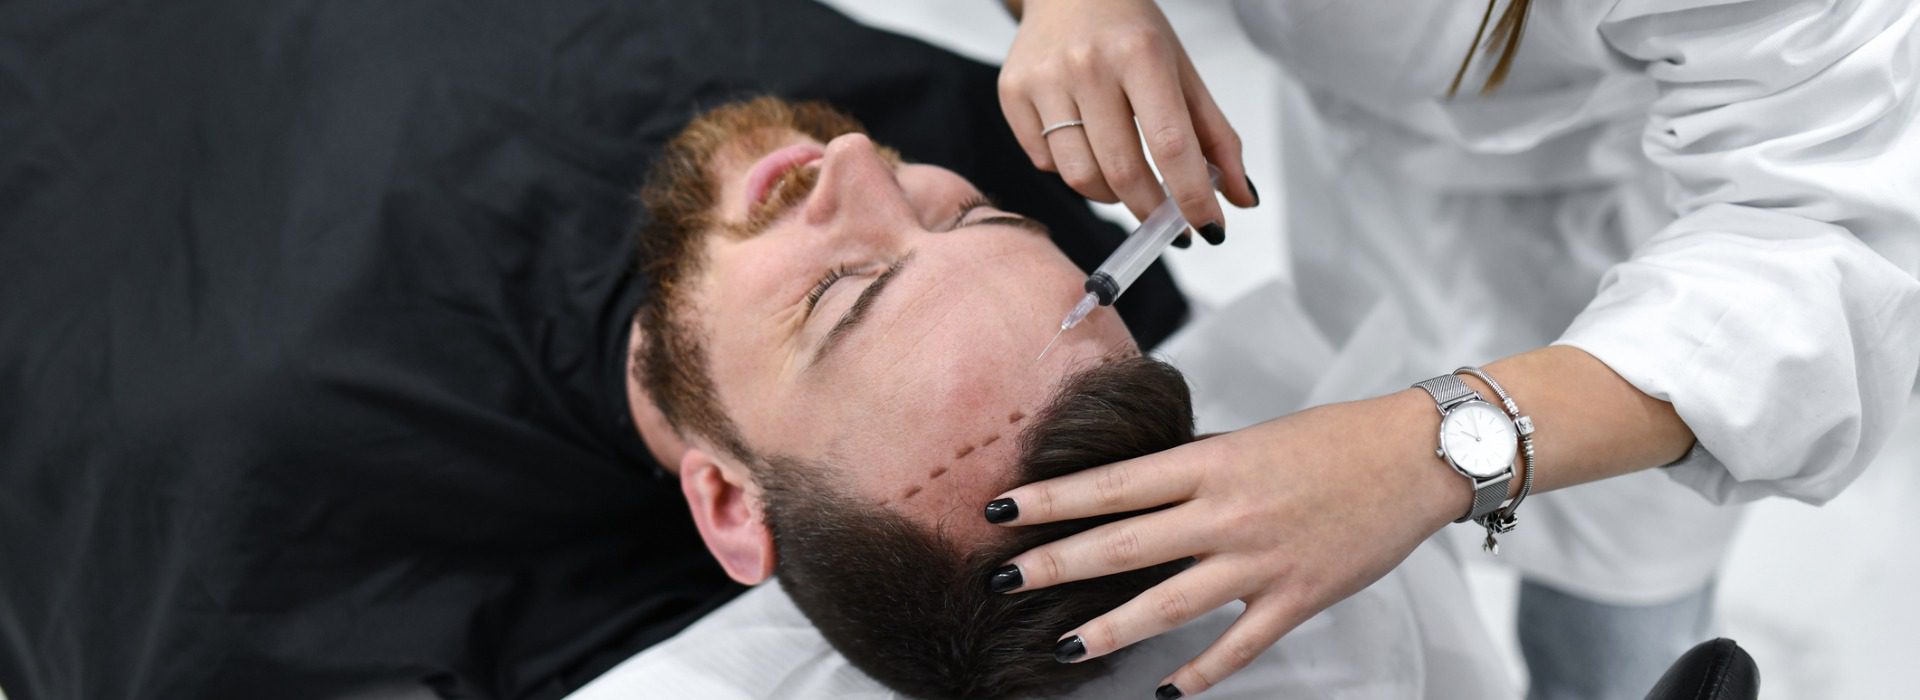 Hair Transplant Before and After: Managing Expectations